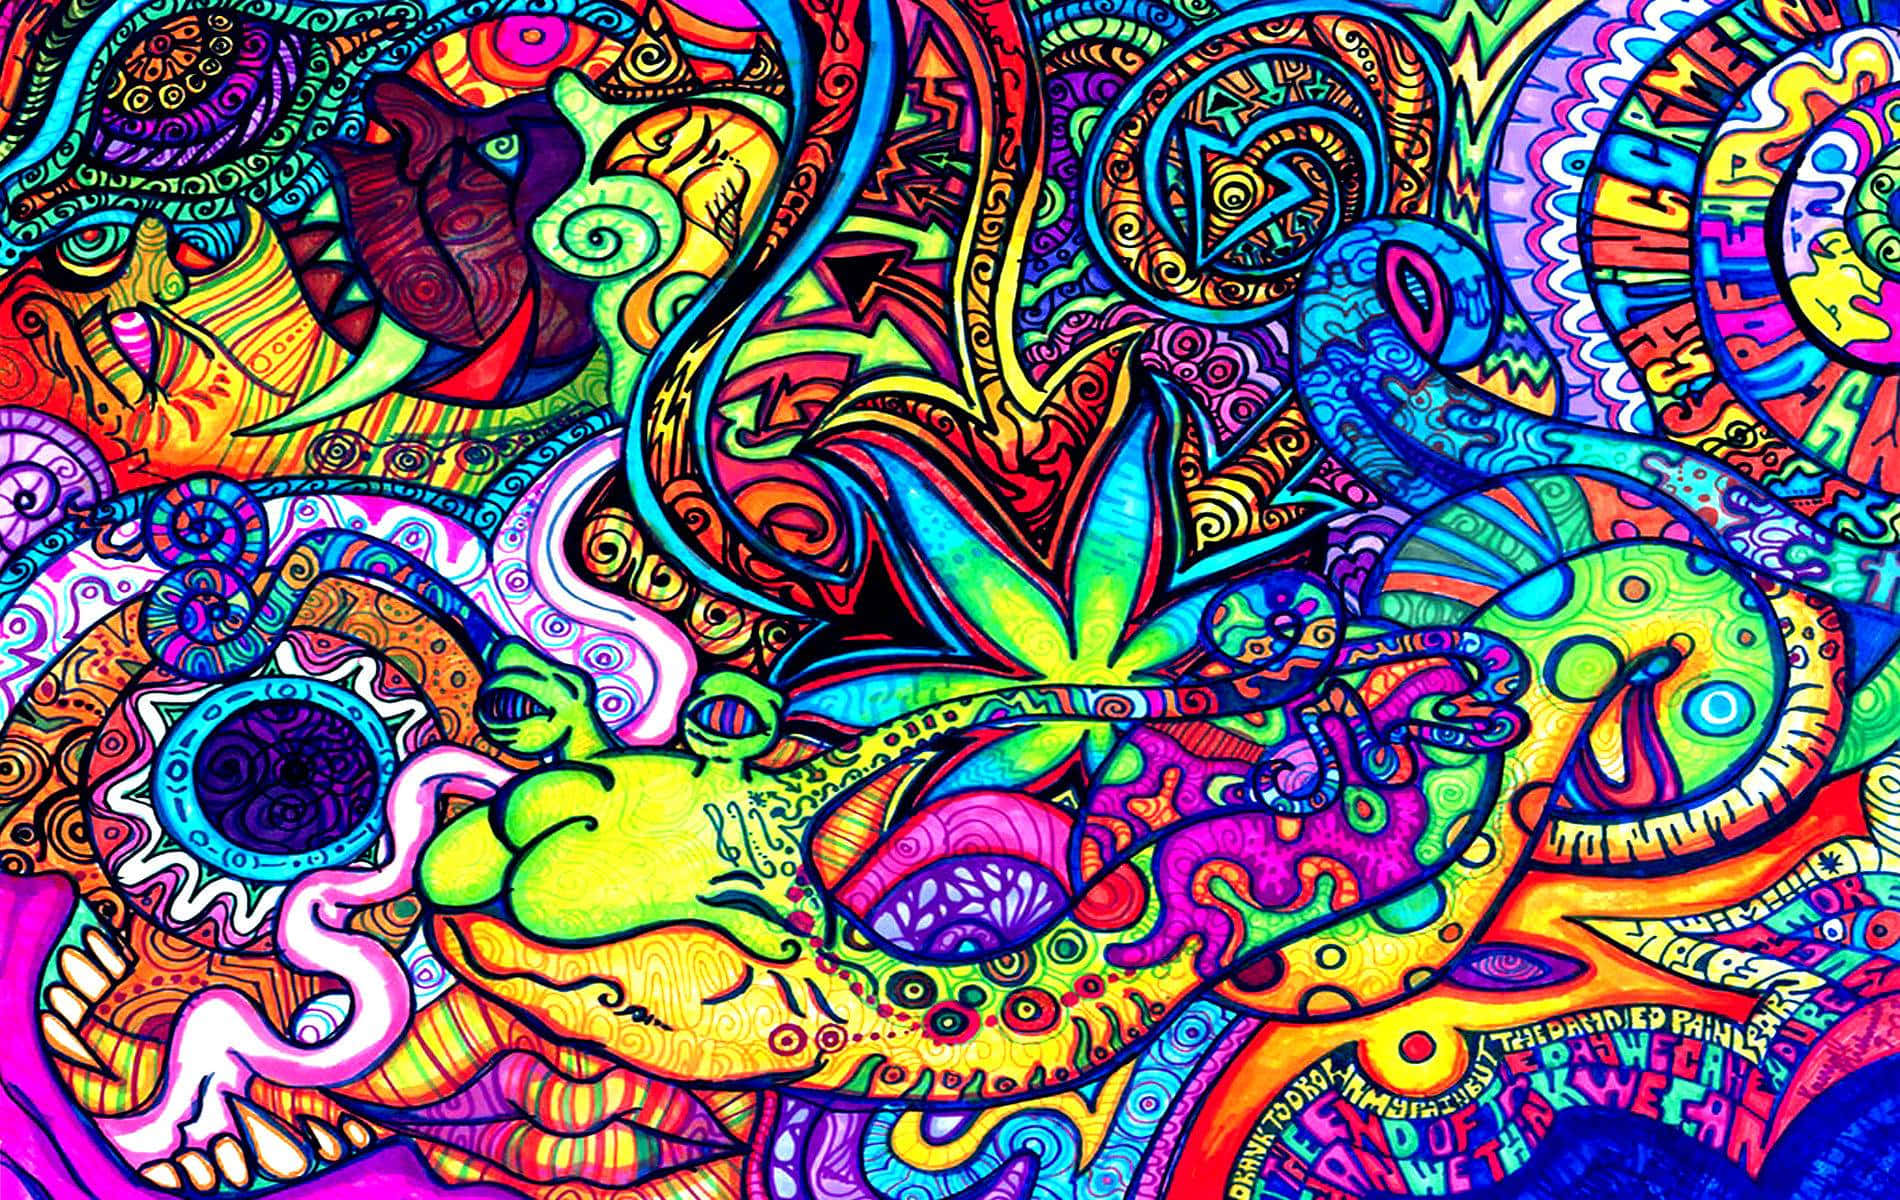 "Experience an Unforgettable Visual Trippy Adventure" Wallpaper